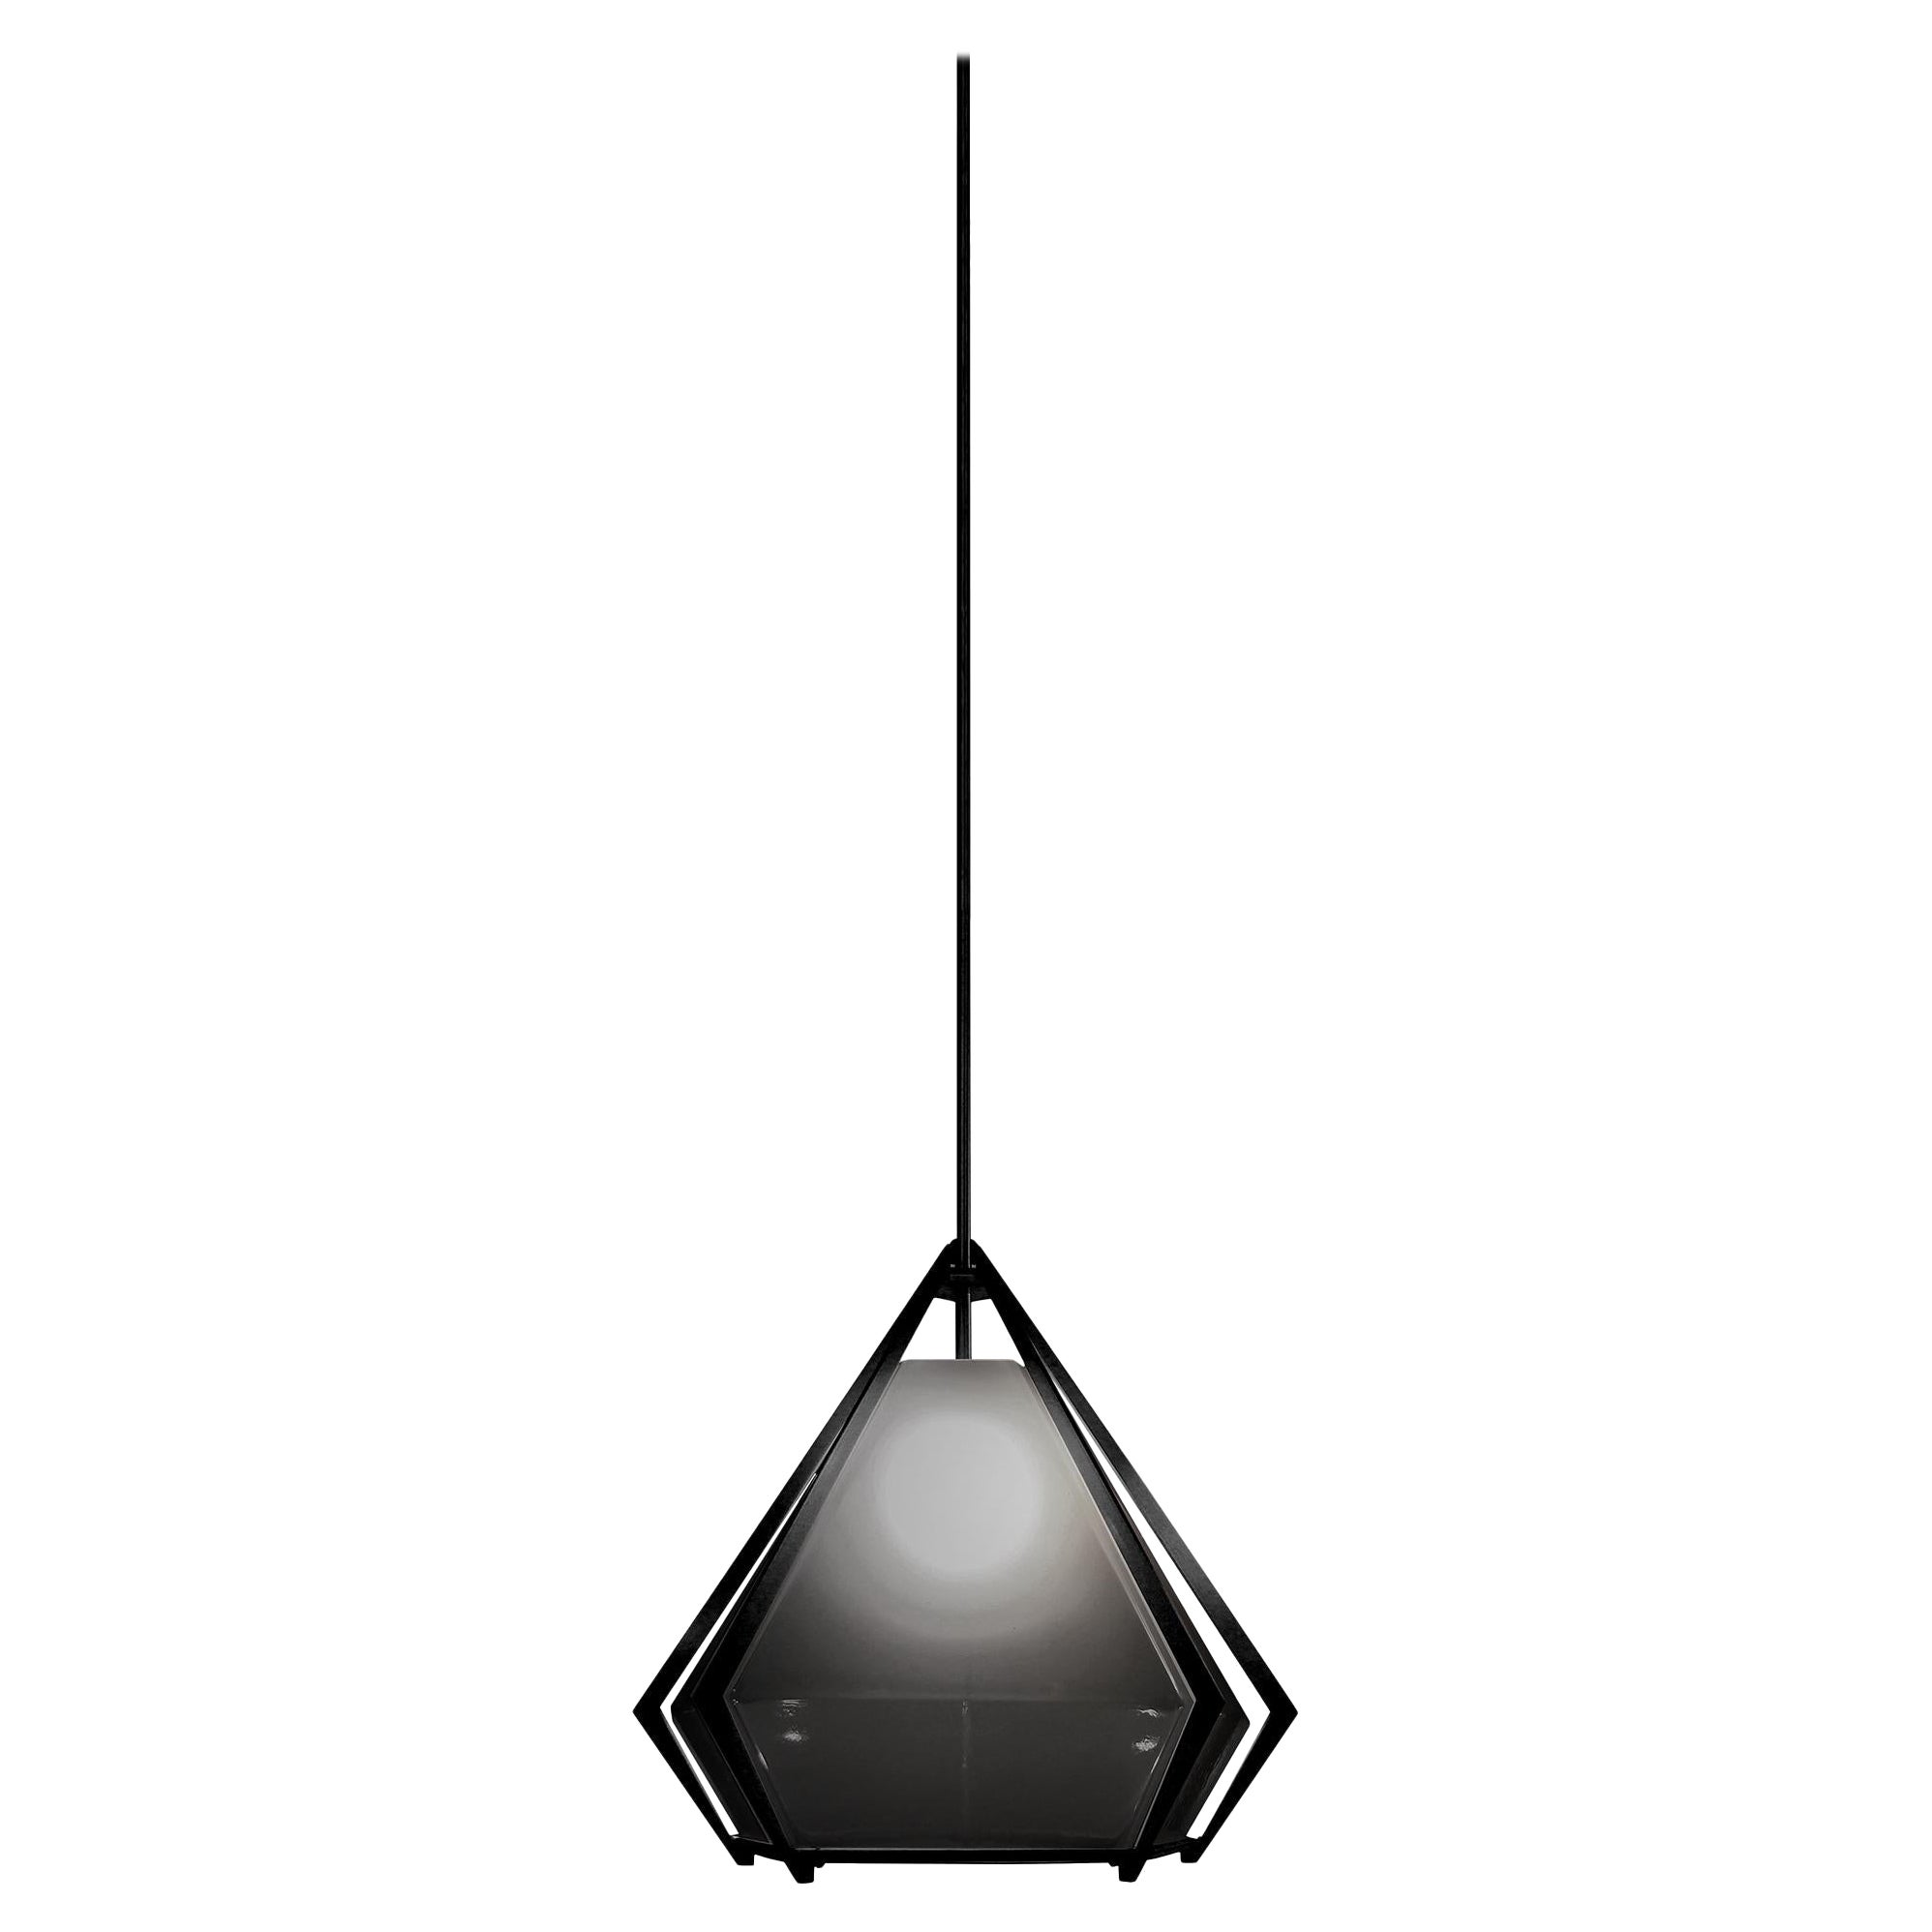 Harlow Small Pendant in Blackened Steel & Alabaster White Glass